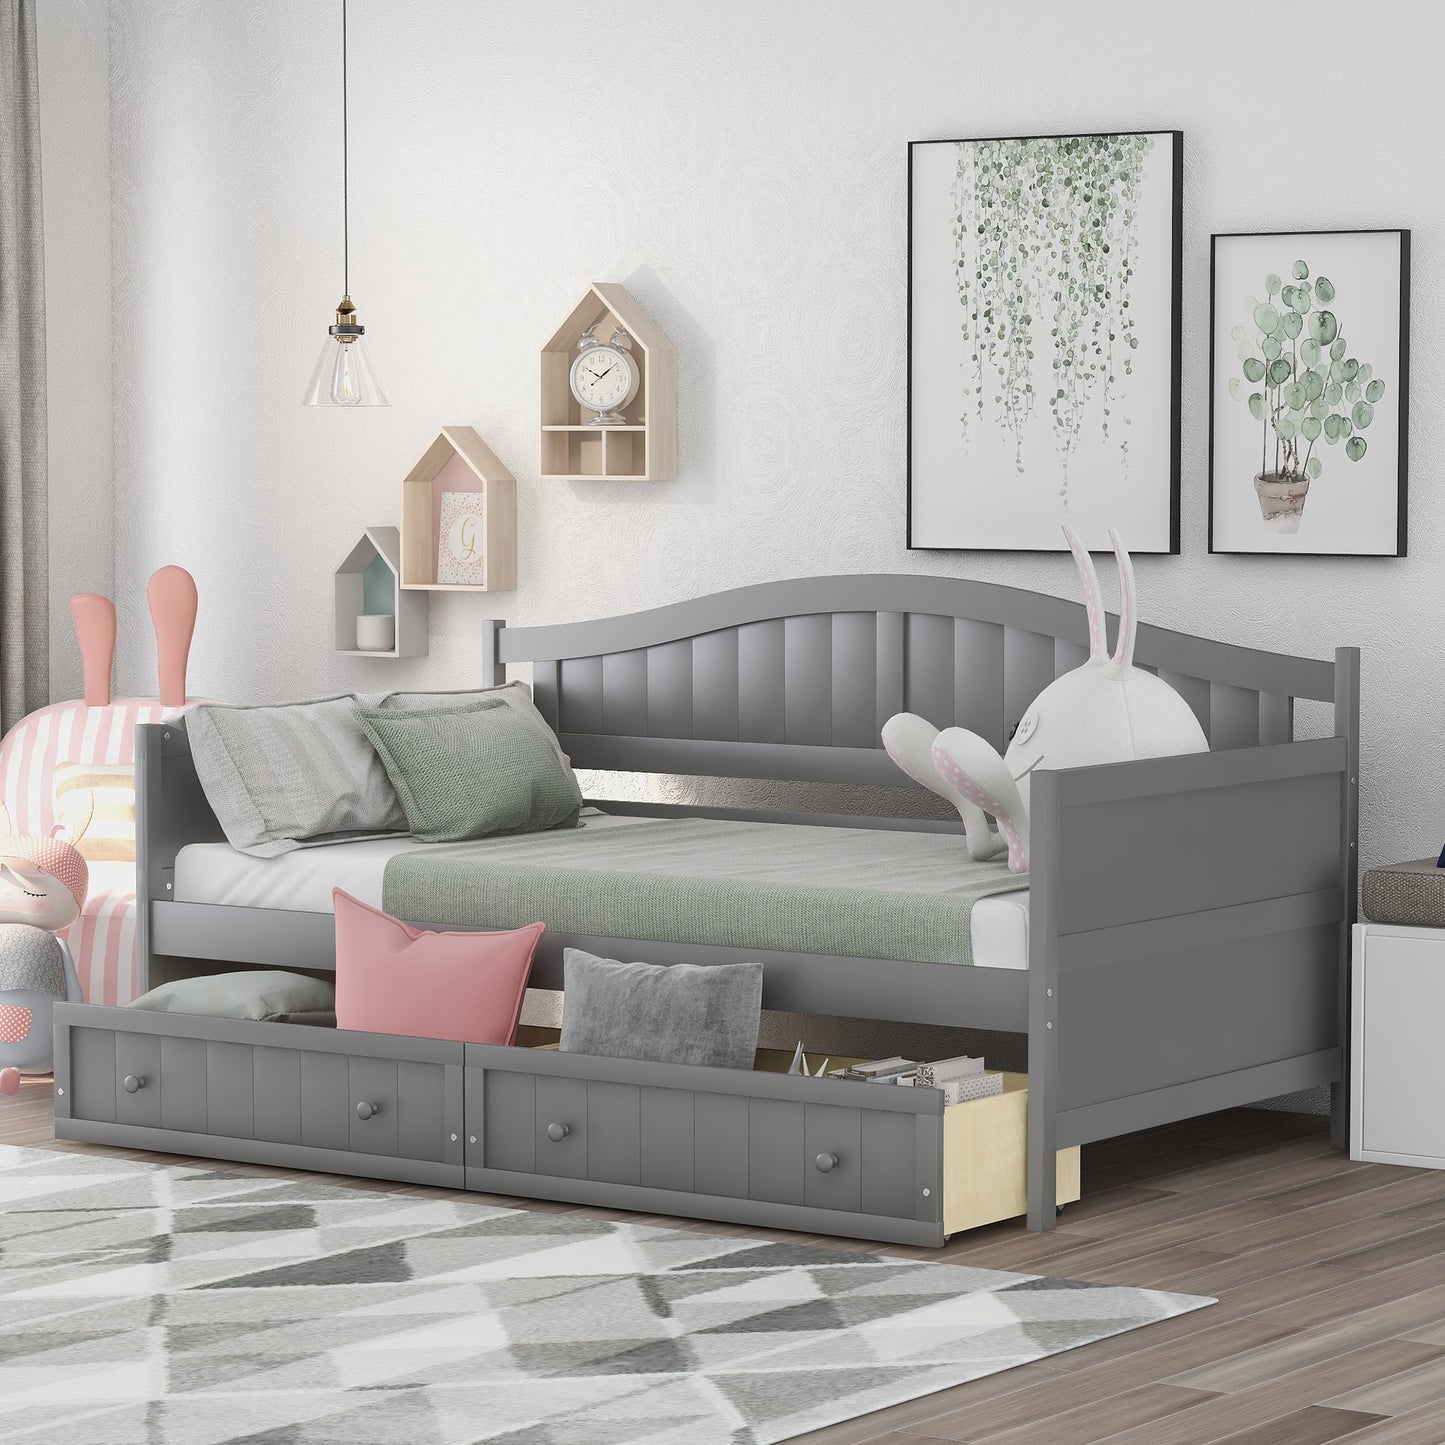 Twin Wooden Daybed with 2 drawers, Sofa Bed for Bedroom Living Room,No Box Spring Needed,Gray